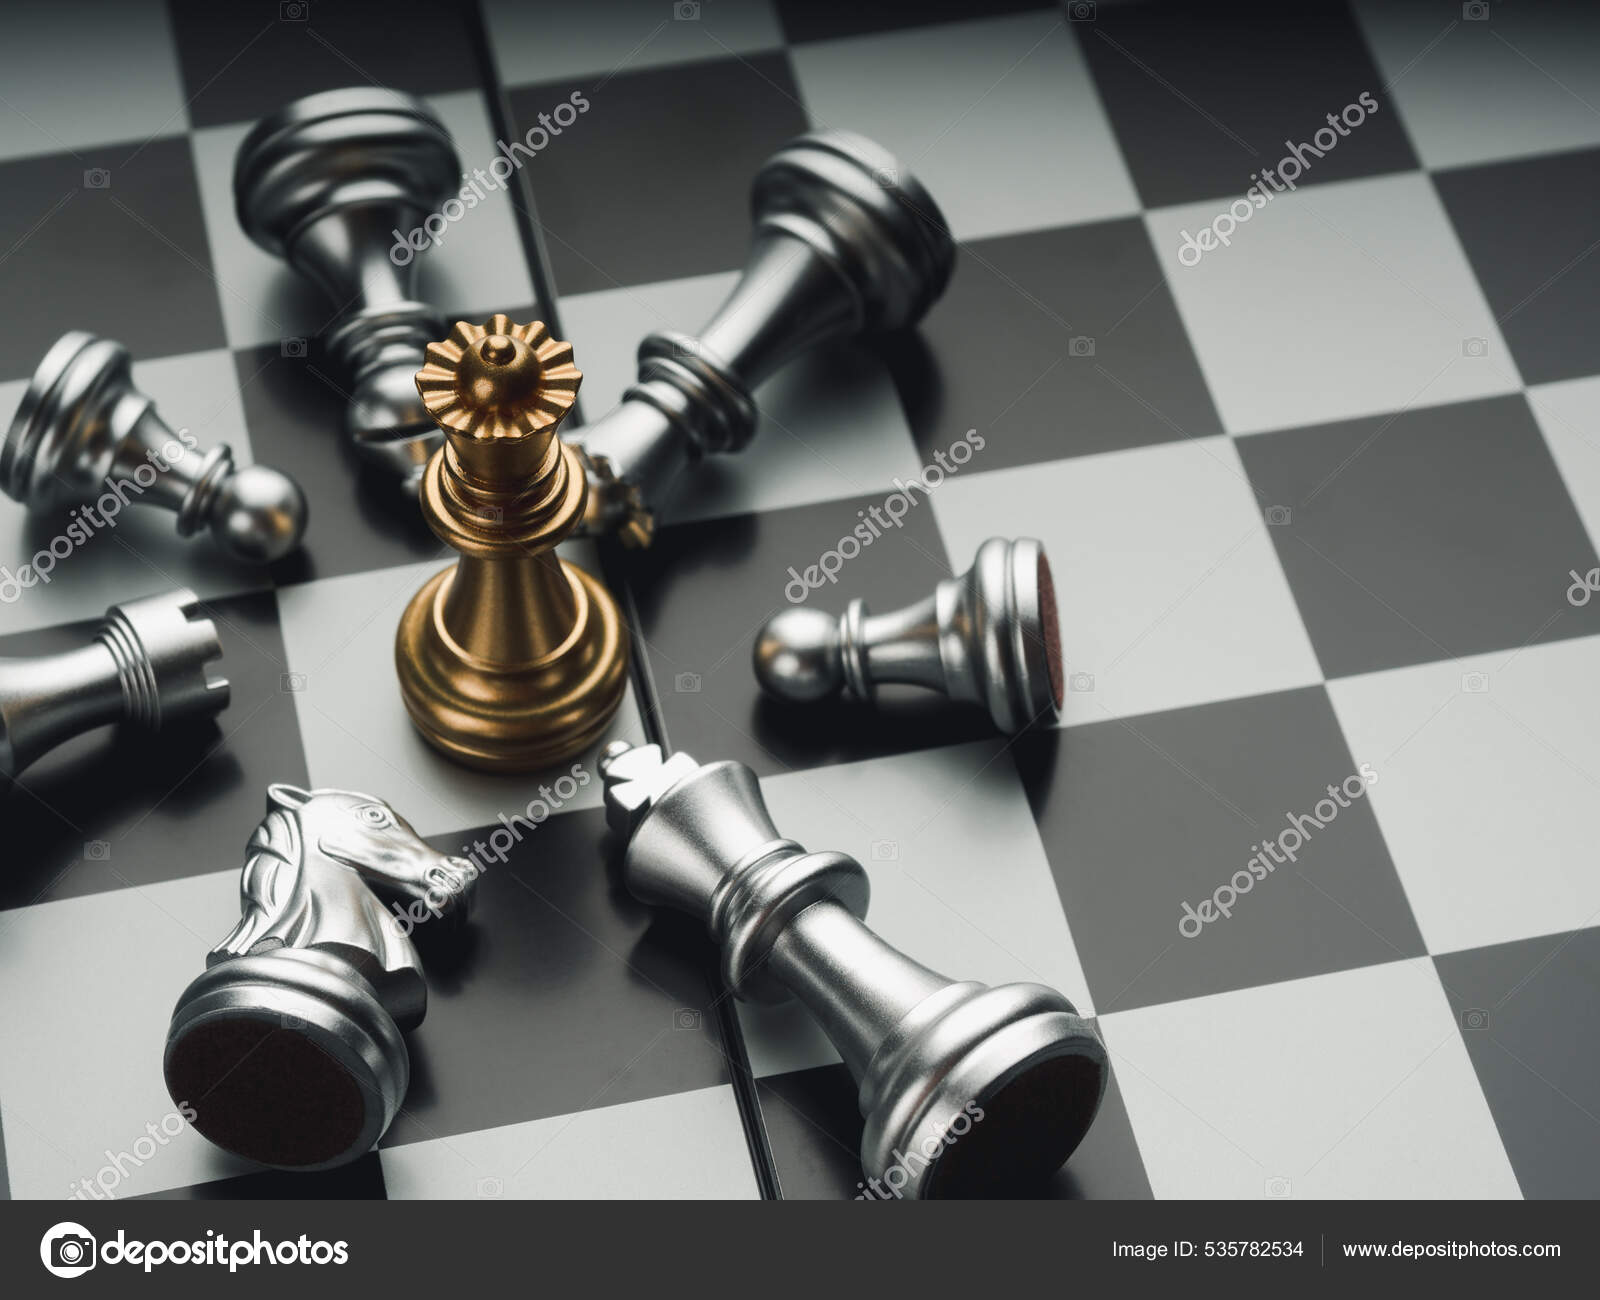 Golden King And Queen Chess Piece Concept For Business Competition